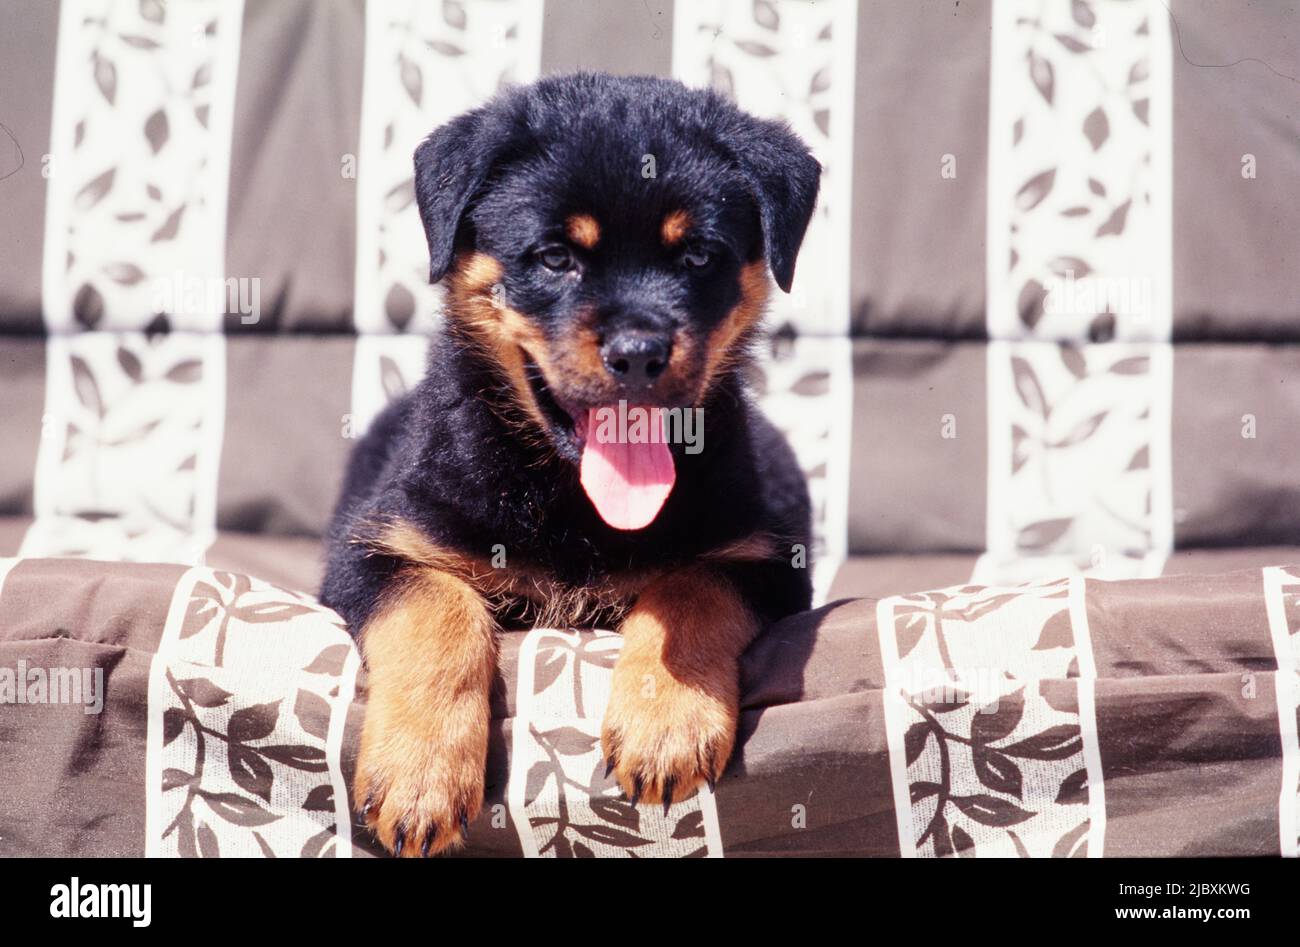 A rottweiler puppy on a fabric covered bench seat Stock Photo